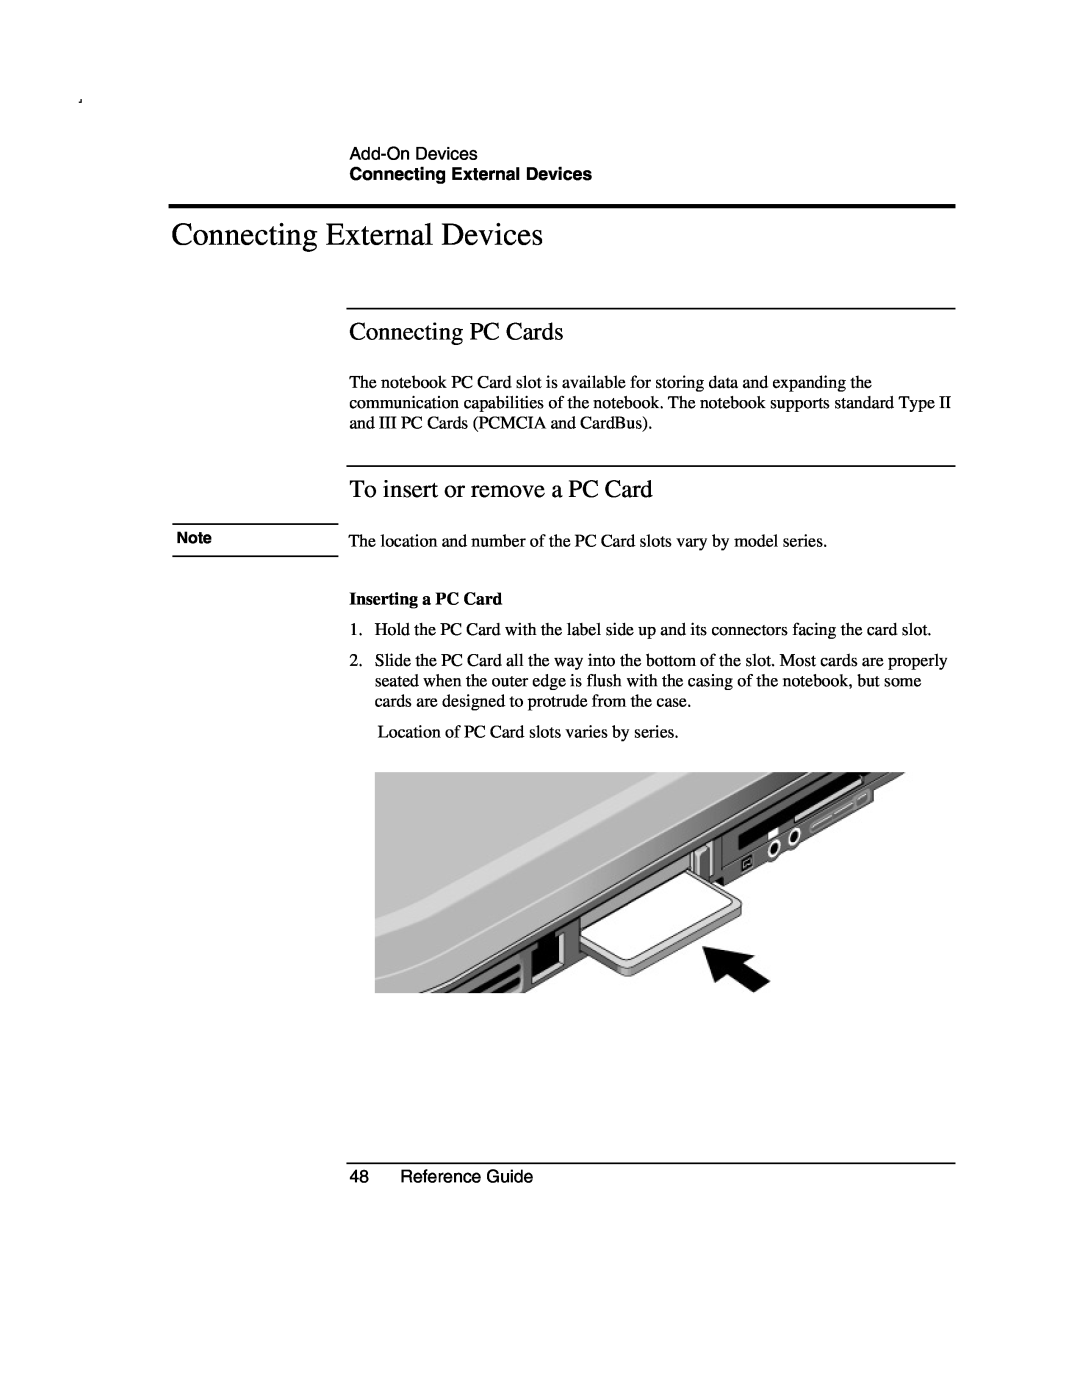 Compaq AMC20493-KT5 Connecting External Devices, Connecting PC Cards, To insert or remove a PC Card, Inserting a PC Card 